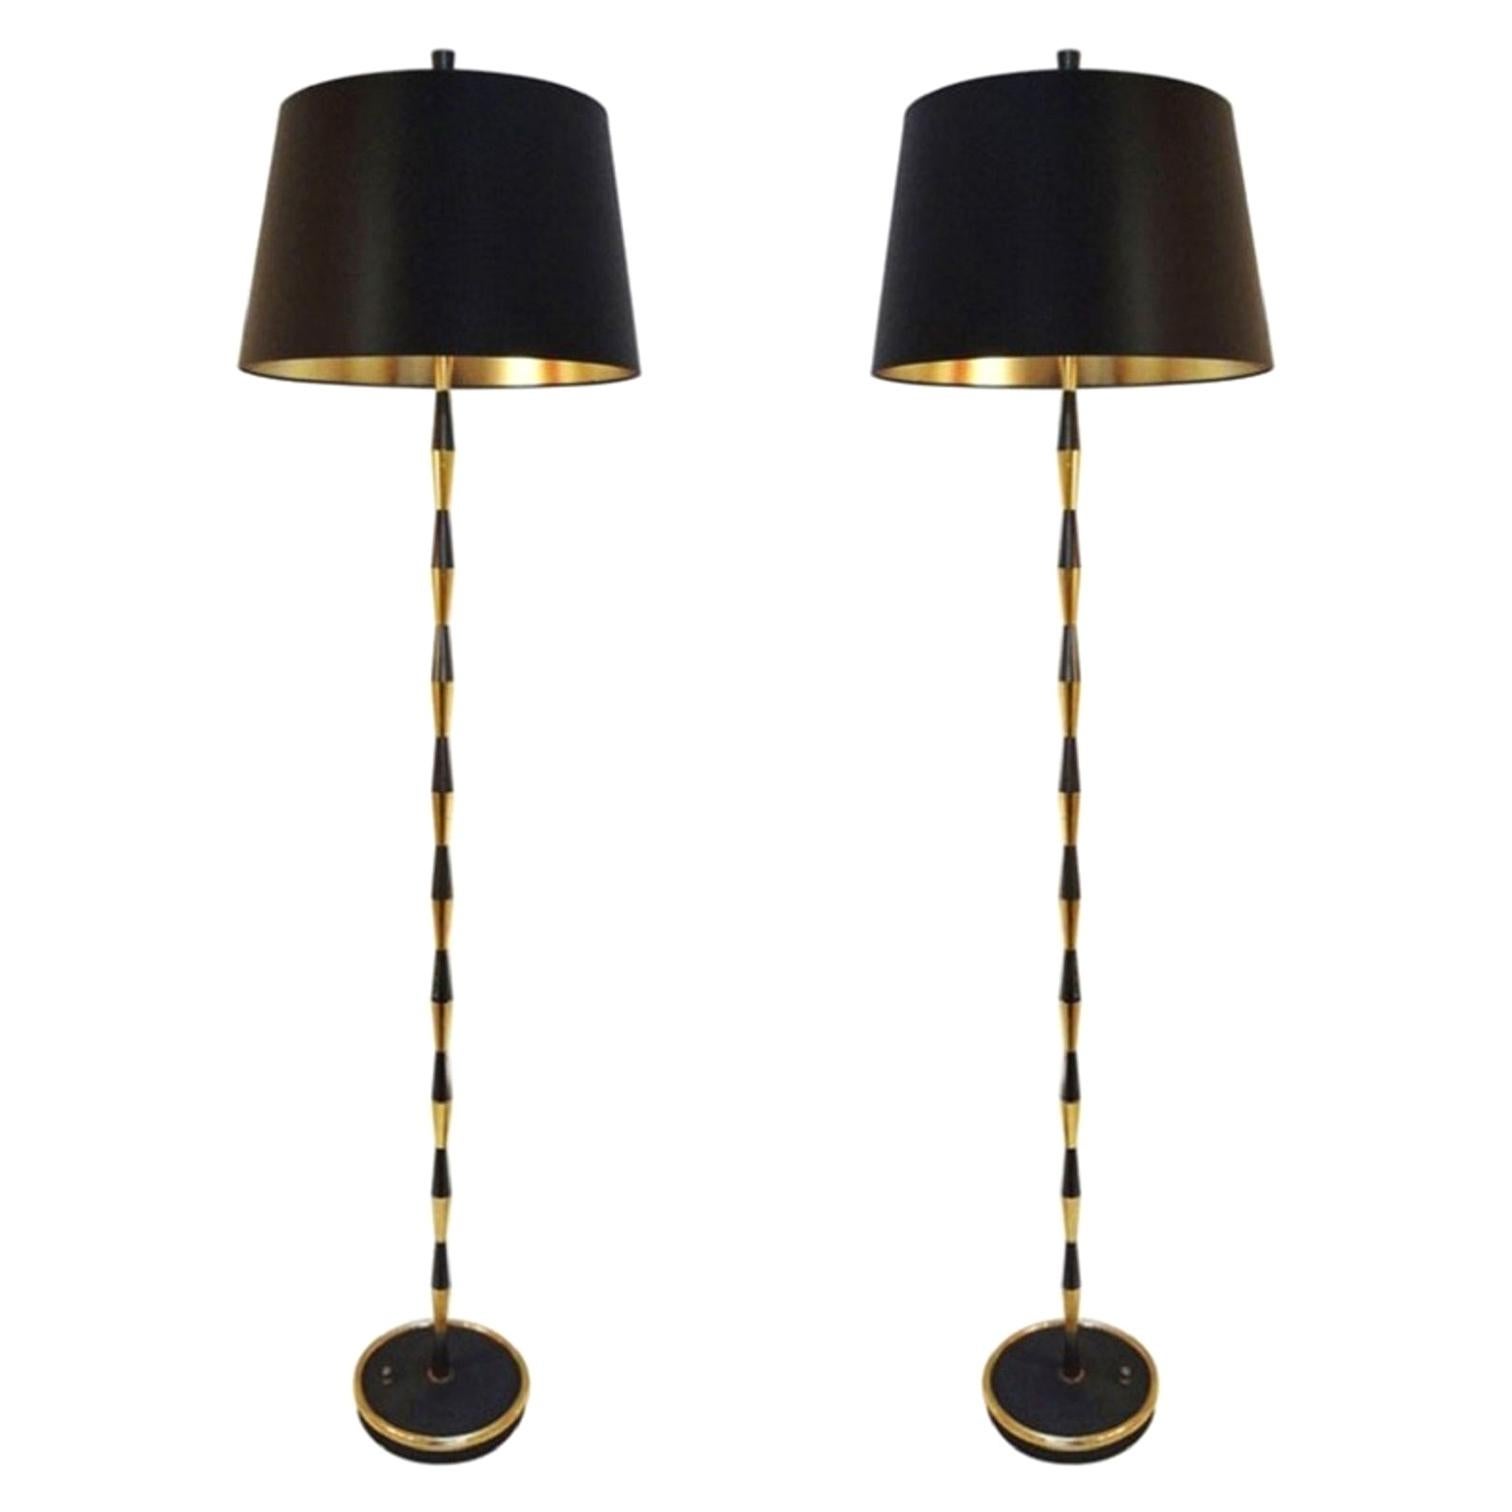 Pair of Black and Gilt Brass Floor Lamp by Maison Arlus, 1960s For Sale